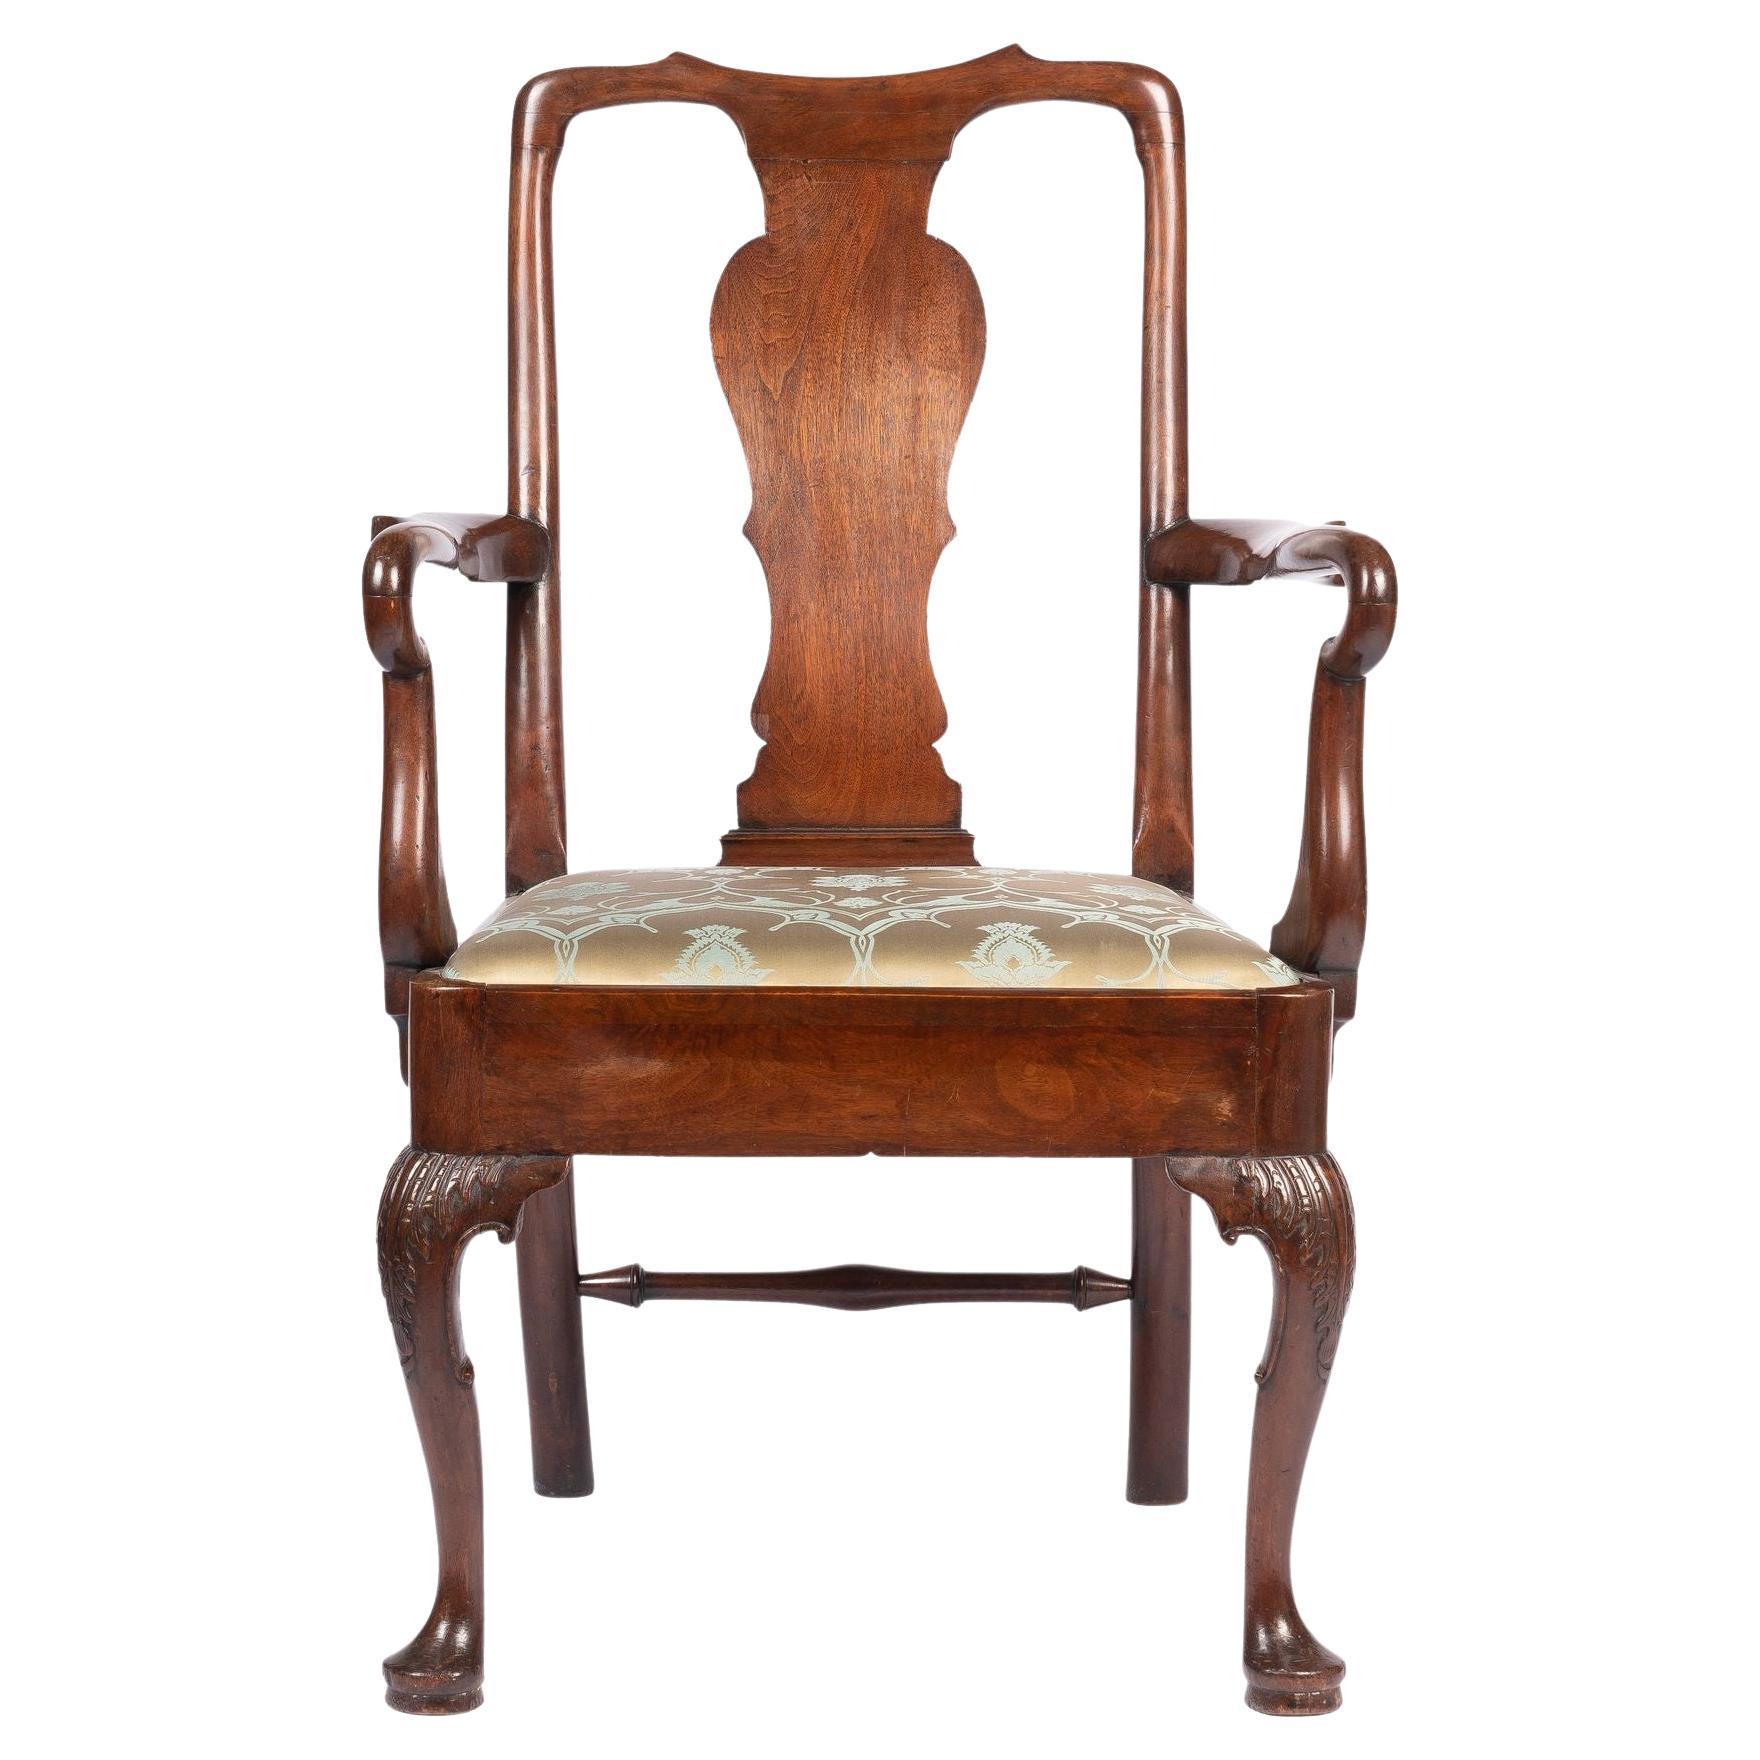 English Georgian Mahogany Armchair with Upholstered Slip Seat, c. 1720 For Sale